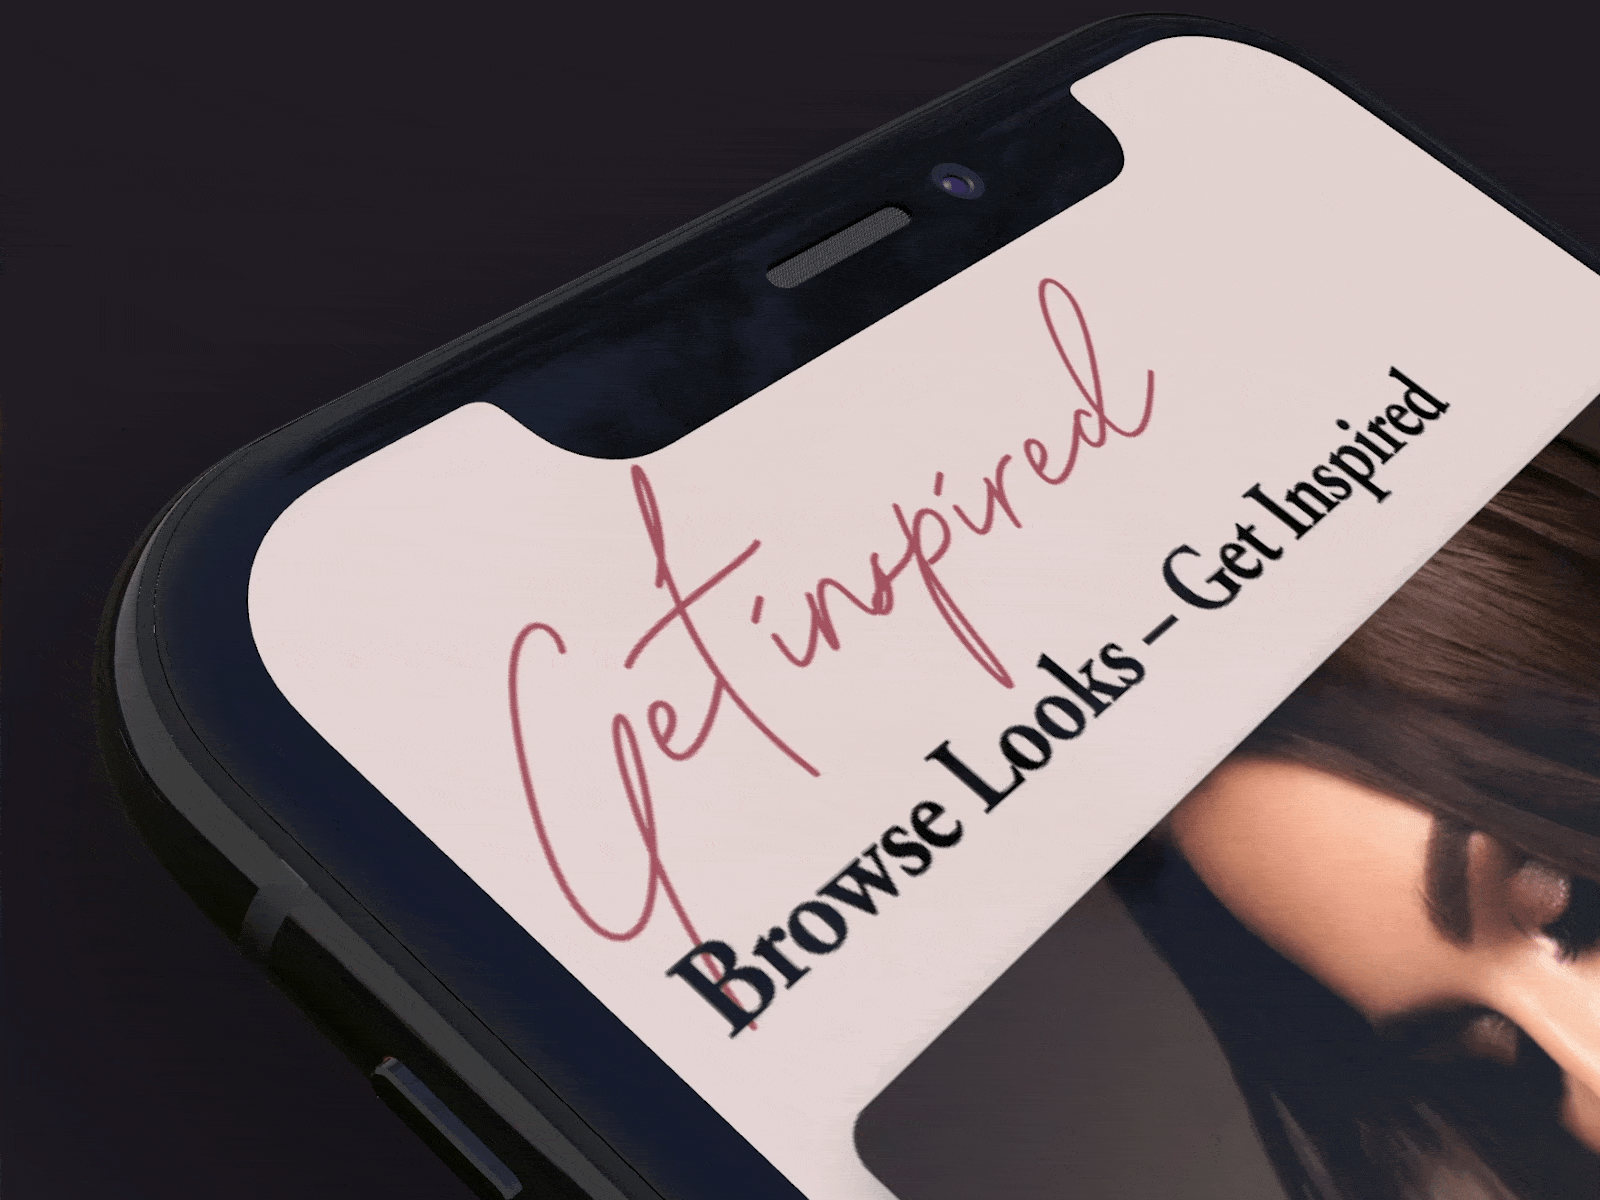 Beauty App UI – Recent Bookings and Suggestion Cards app app ui app ui ux b2c beauty beauty app beauty services dark fashion fashion photography glam glamour innovation makeup red search screen tech technology ui user interface